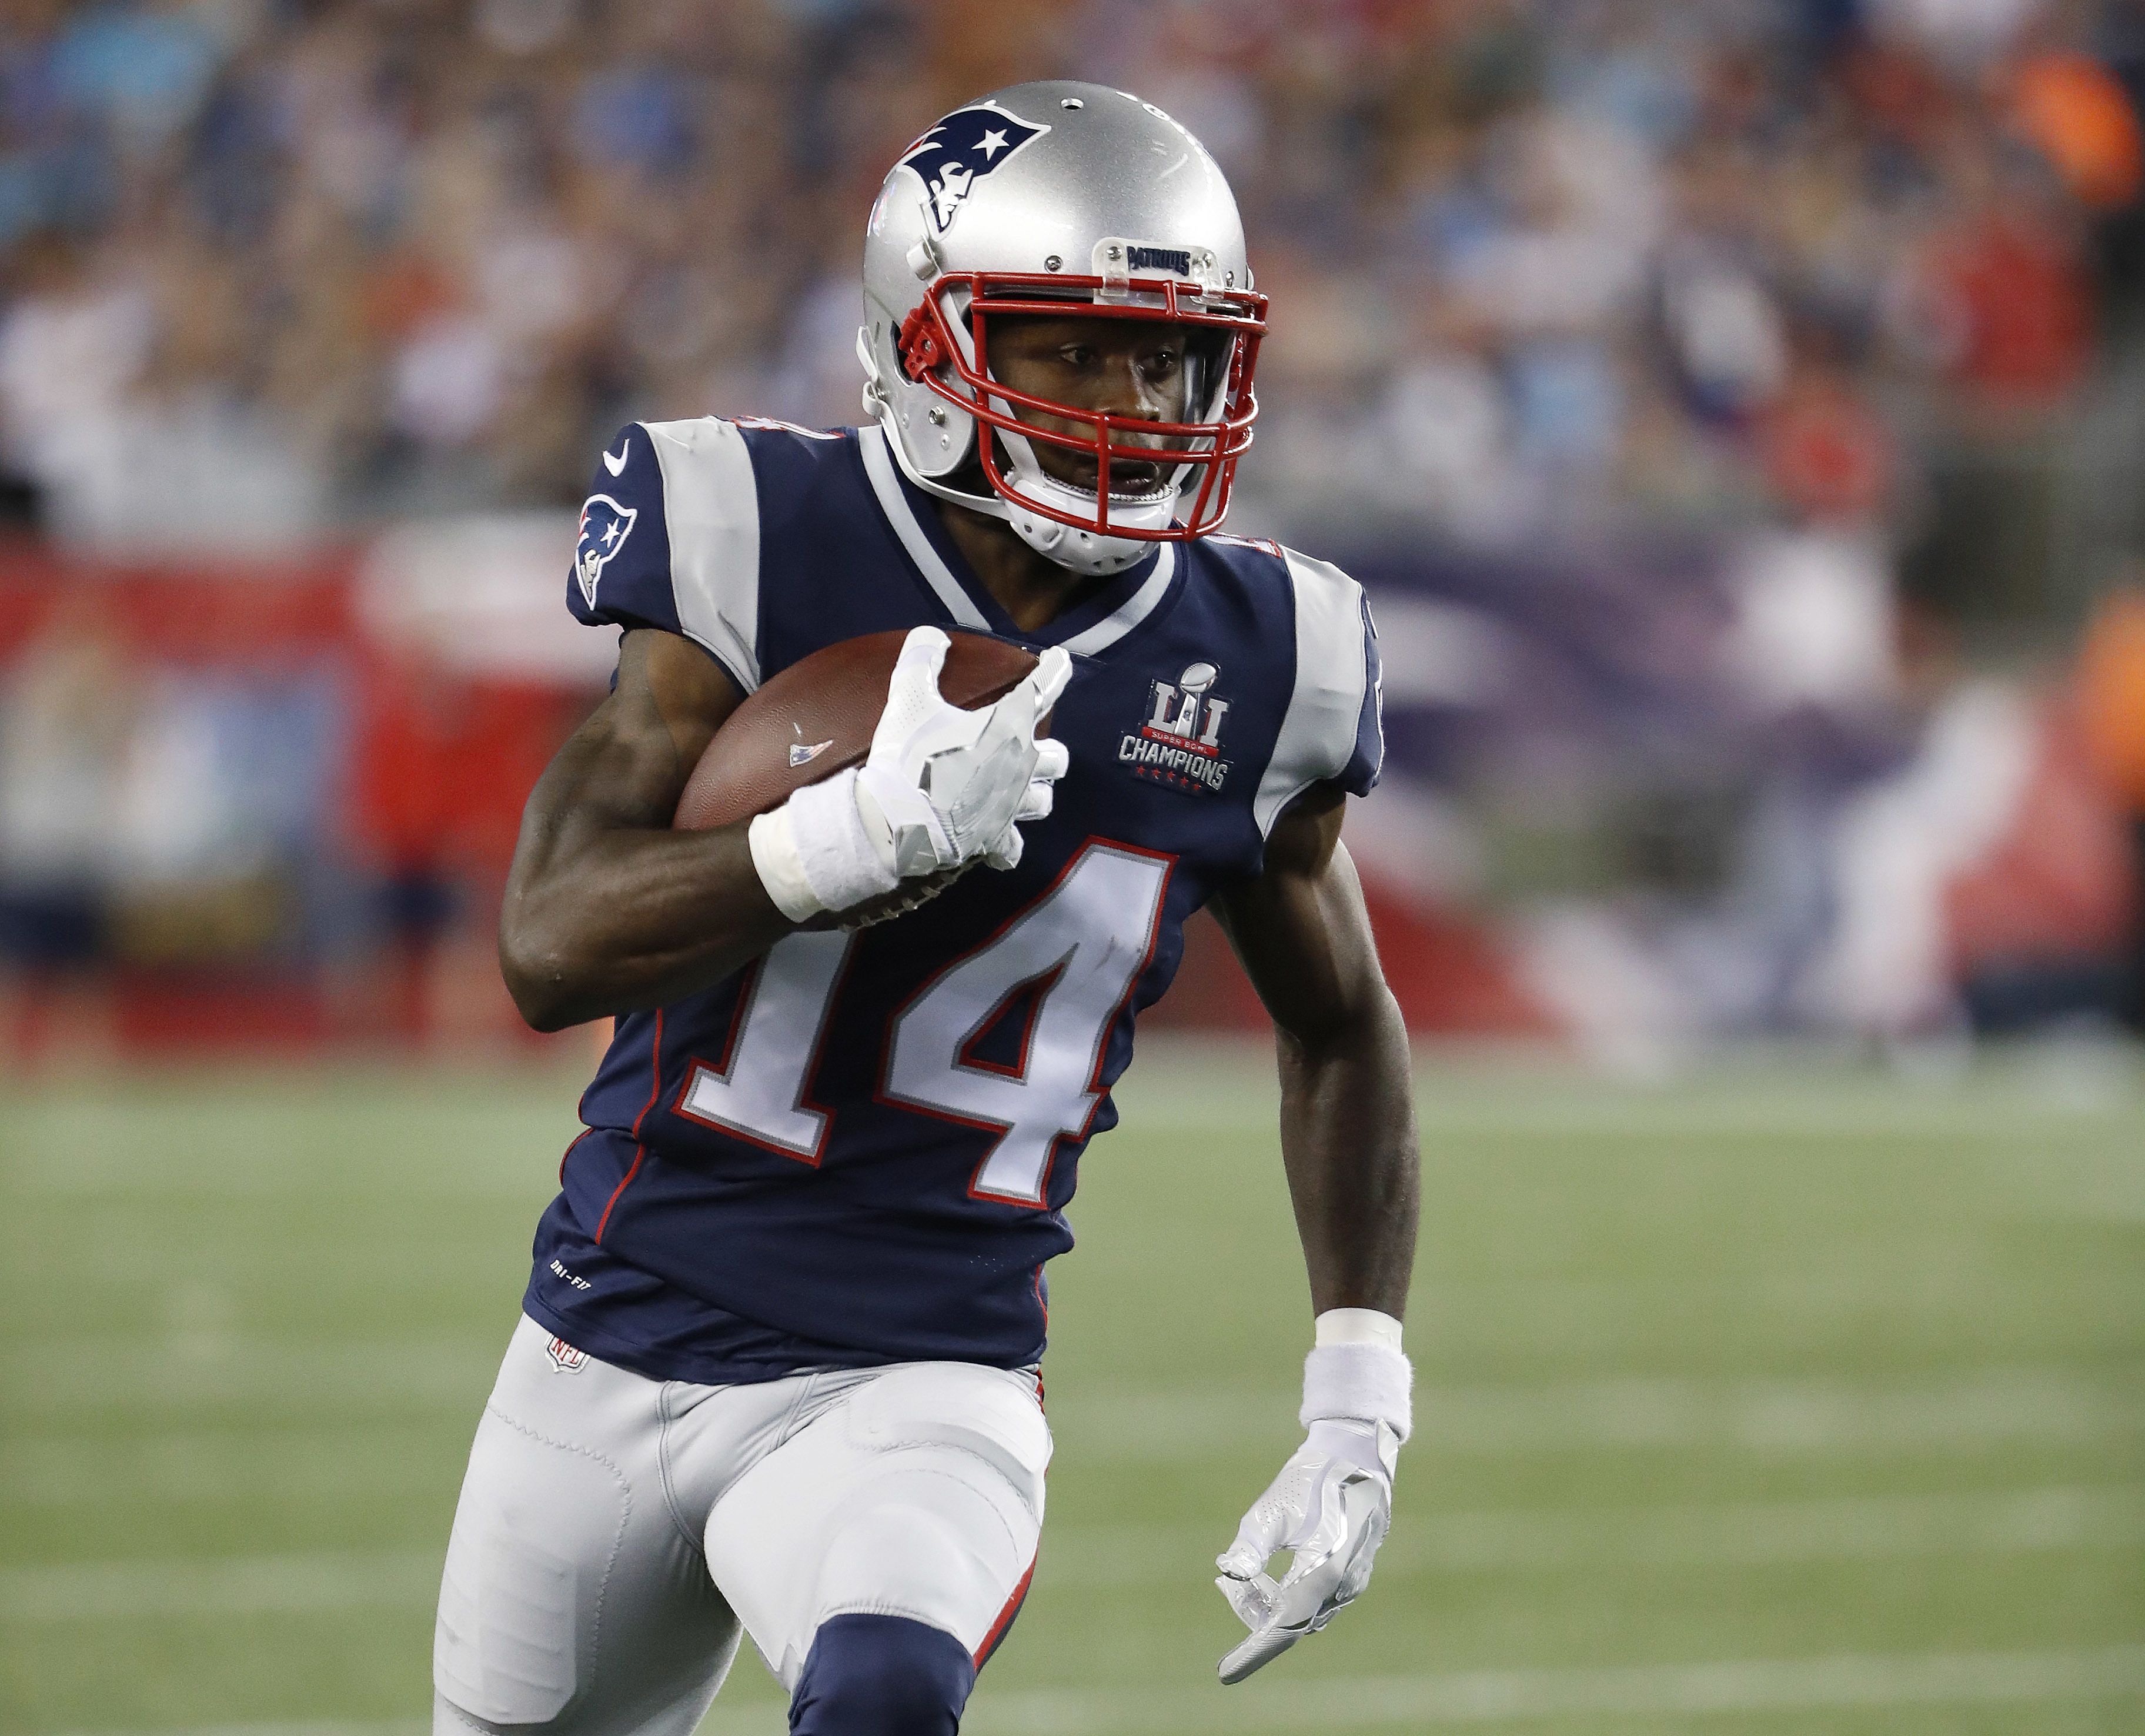 Cowboys' Dez Bryant and Patriots' Brandin Cooks Disappointing So